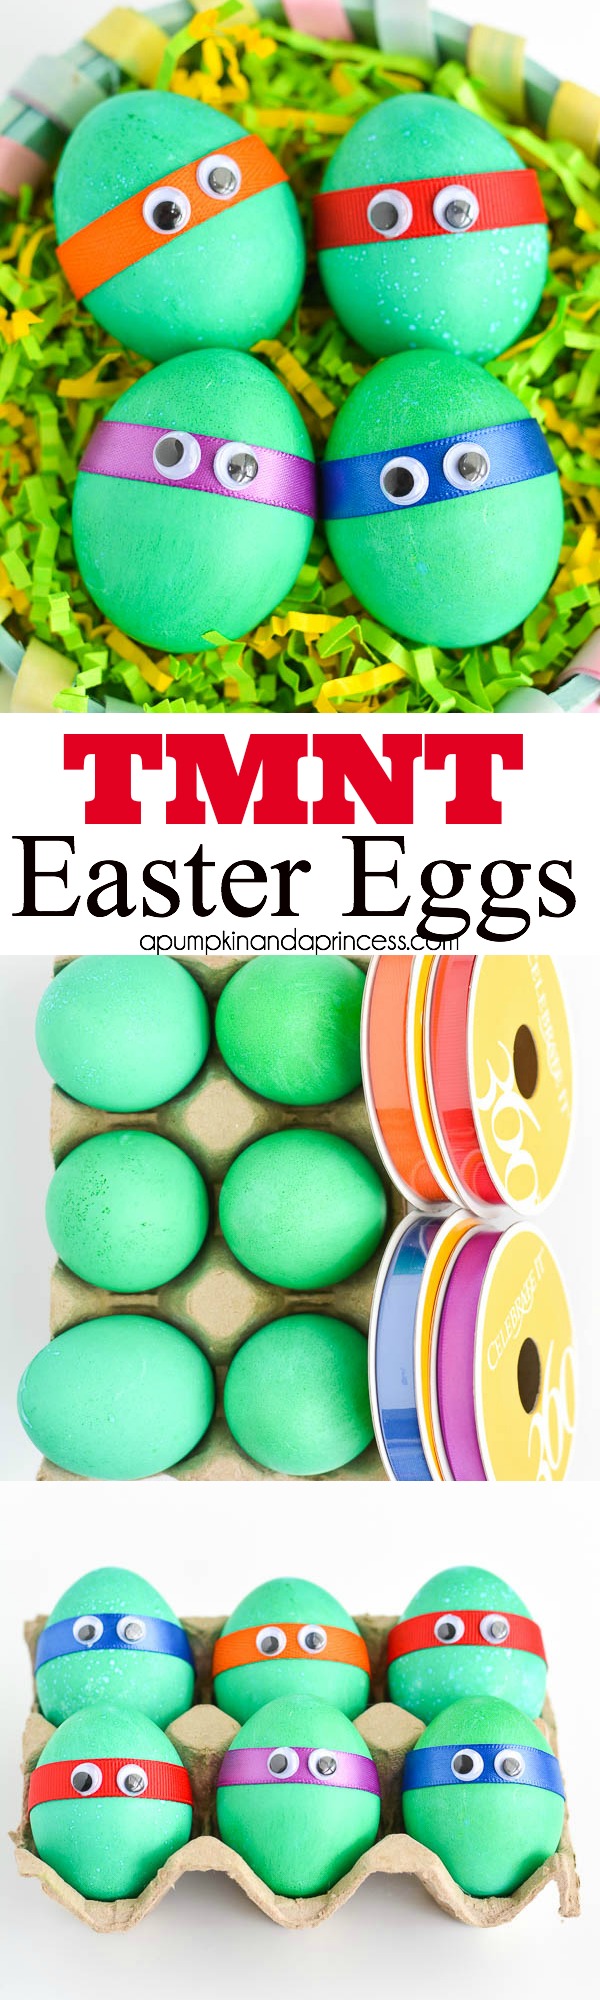 Dyed-TMNT-Easter-Eggs